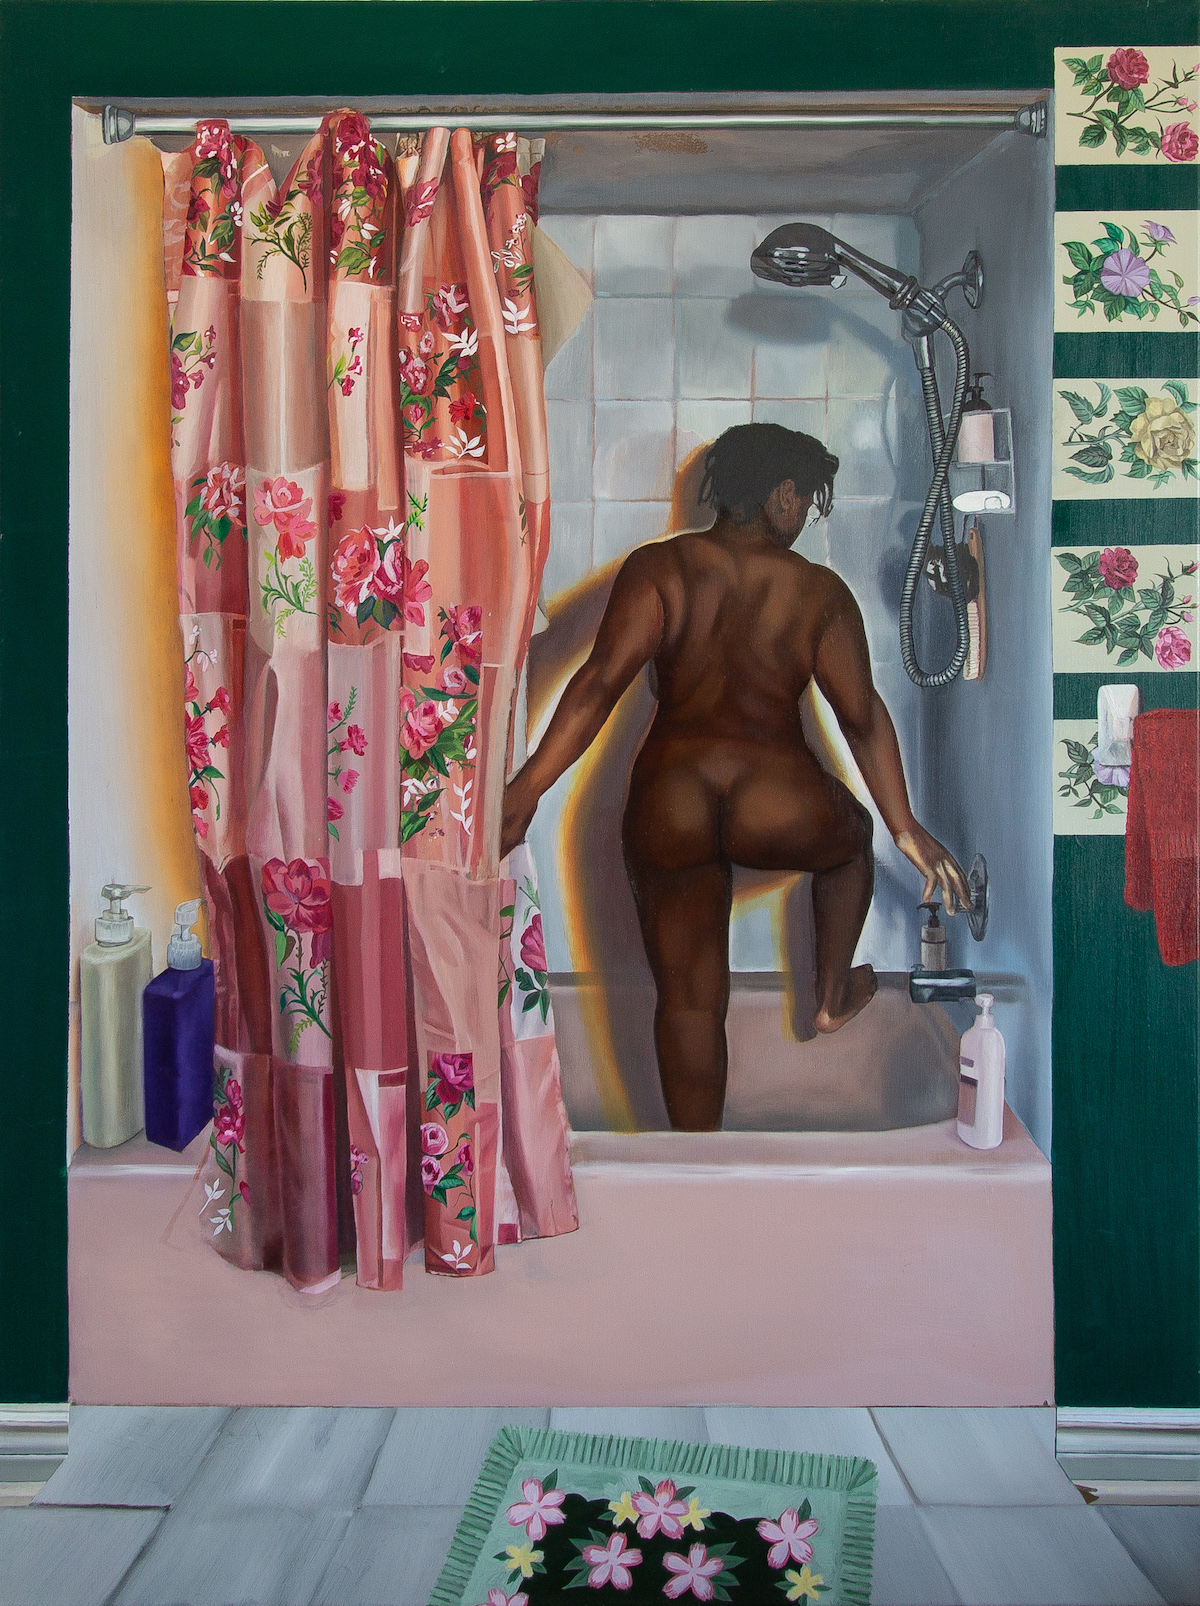 Back view of a nude woman stepping into her bathtub